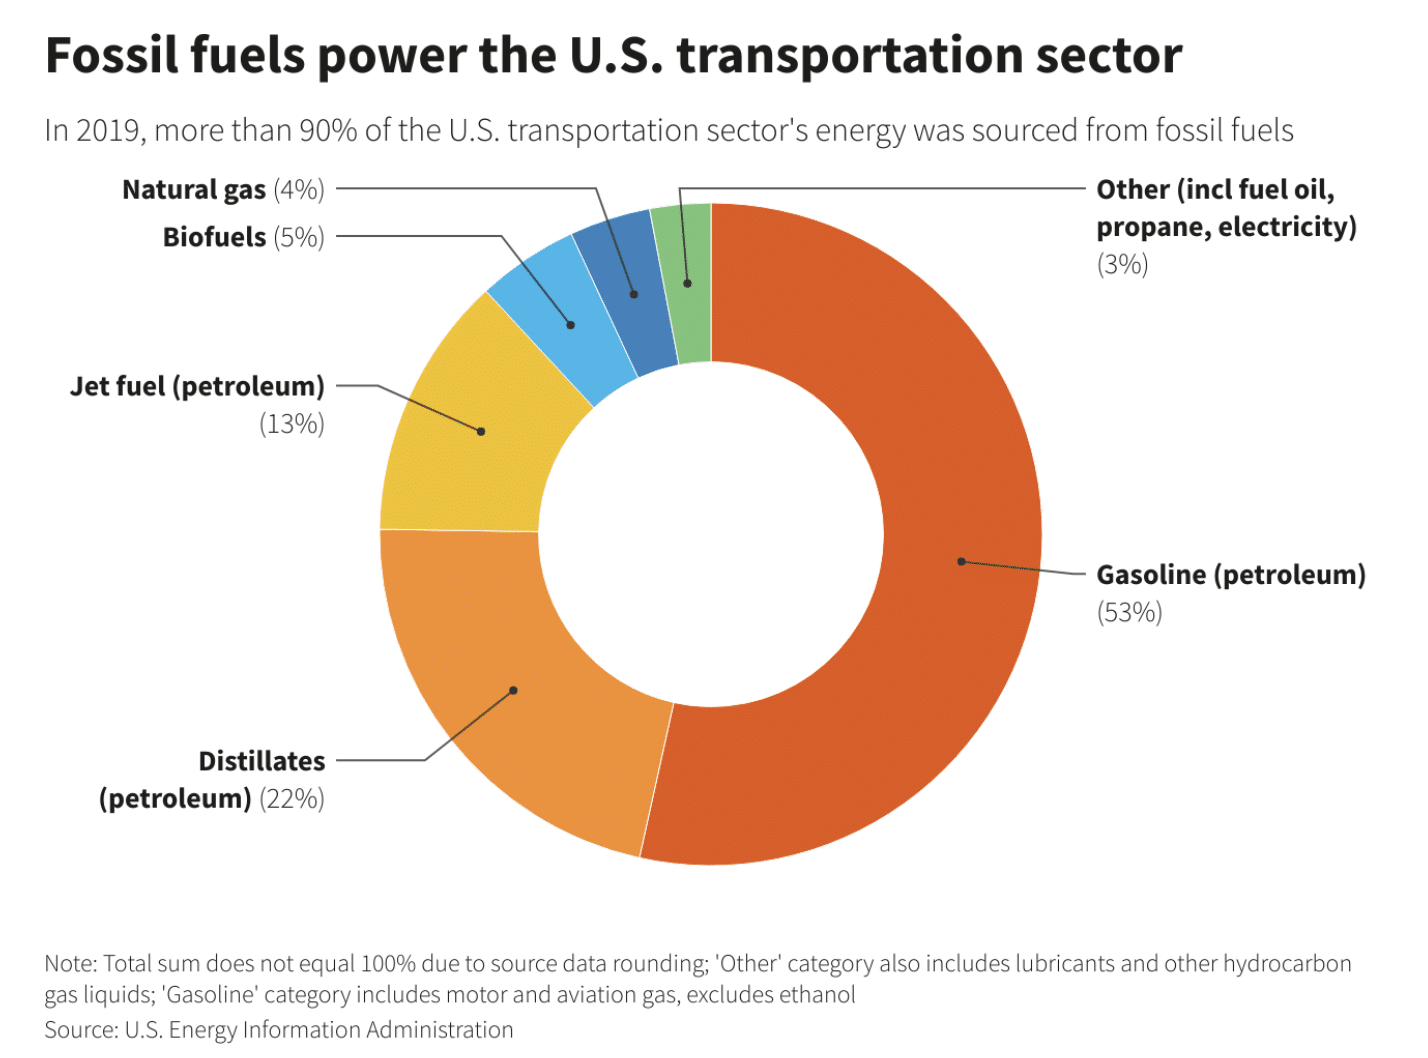 EIA Pie chart of fossil fuels